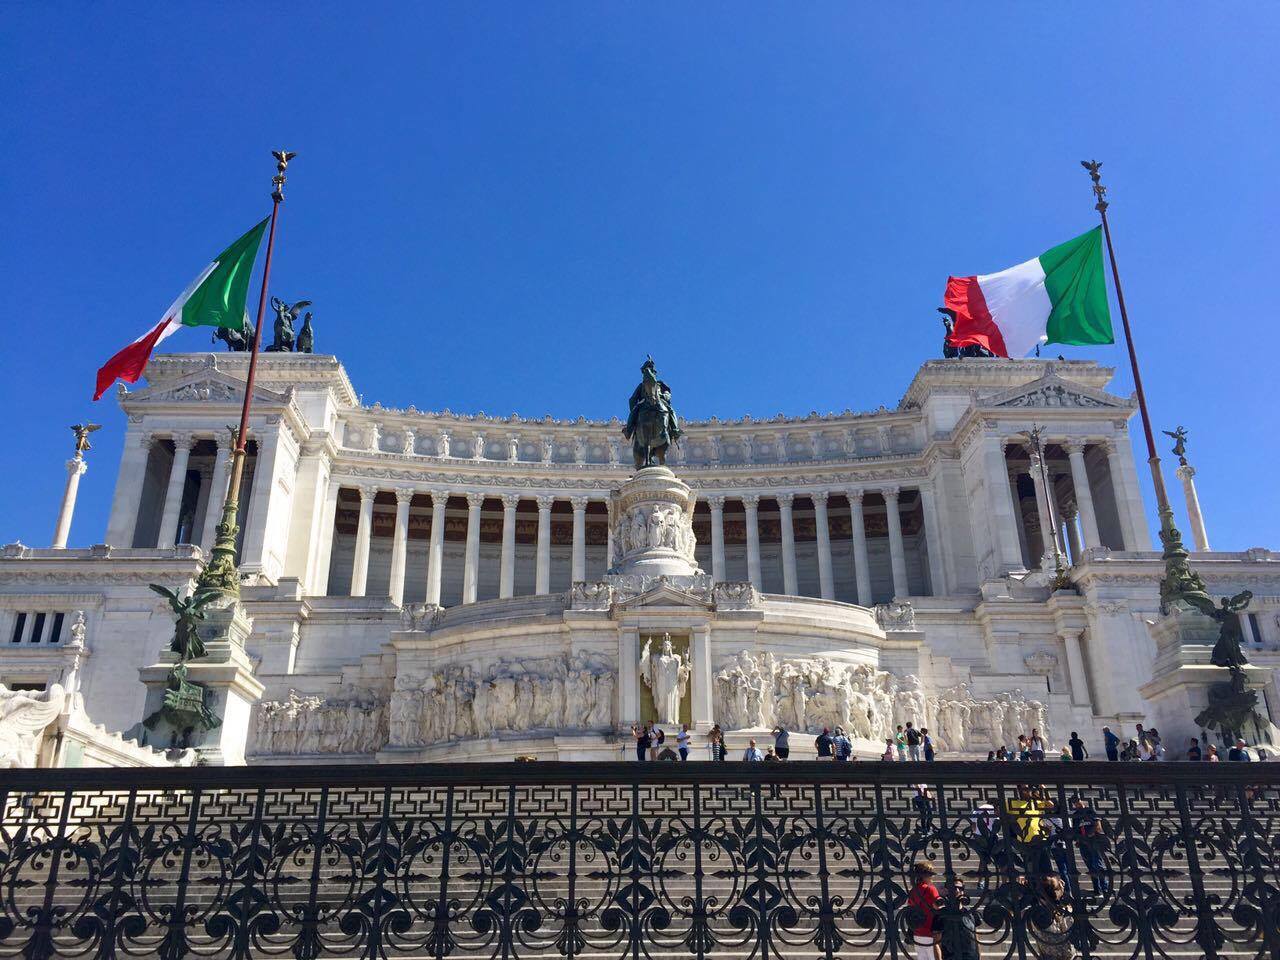  The Altare della Patria is a monument to Italy's first king, Victor Emmanuel, who first unified the nation. Don't let the steps out front fool you, its a bit of a climb.&nbsp; 